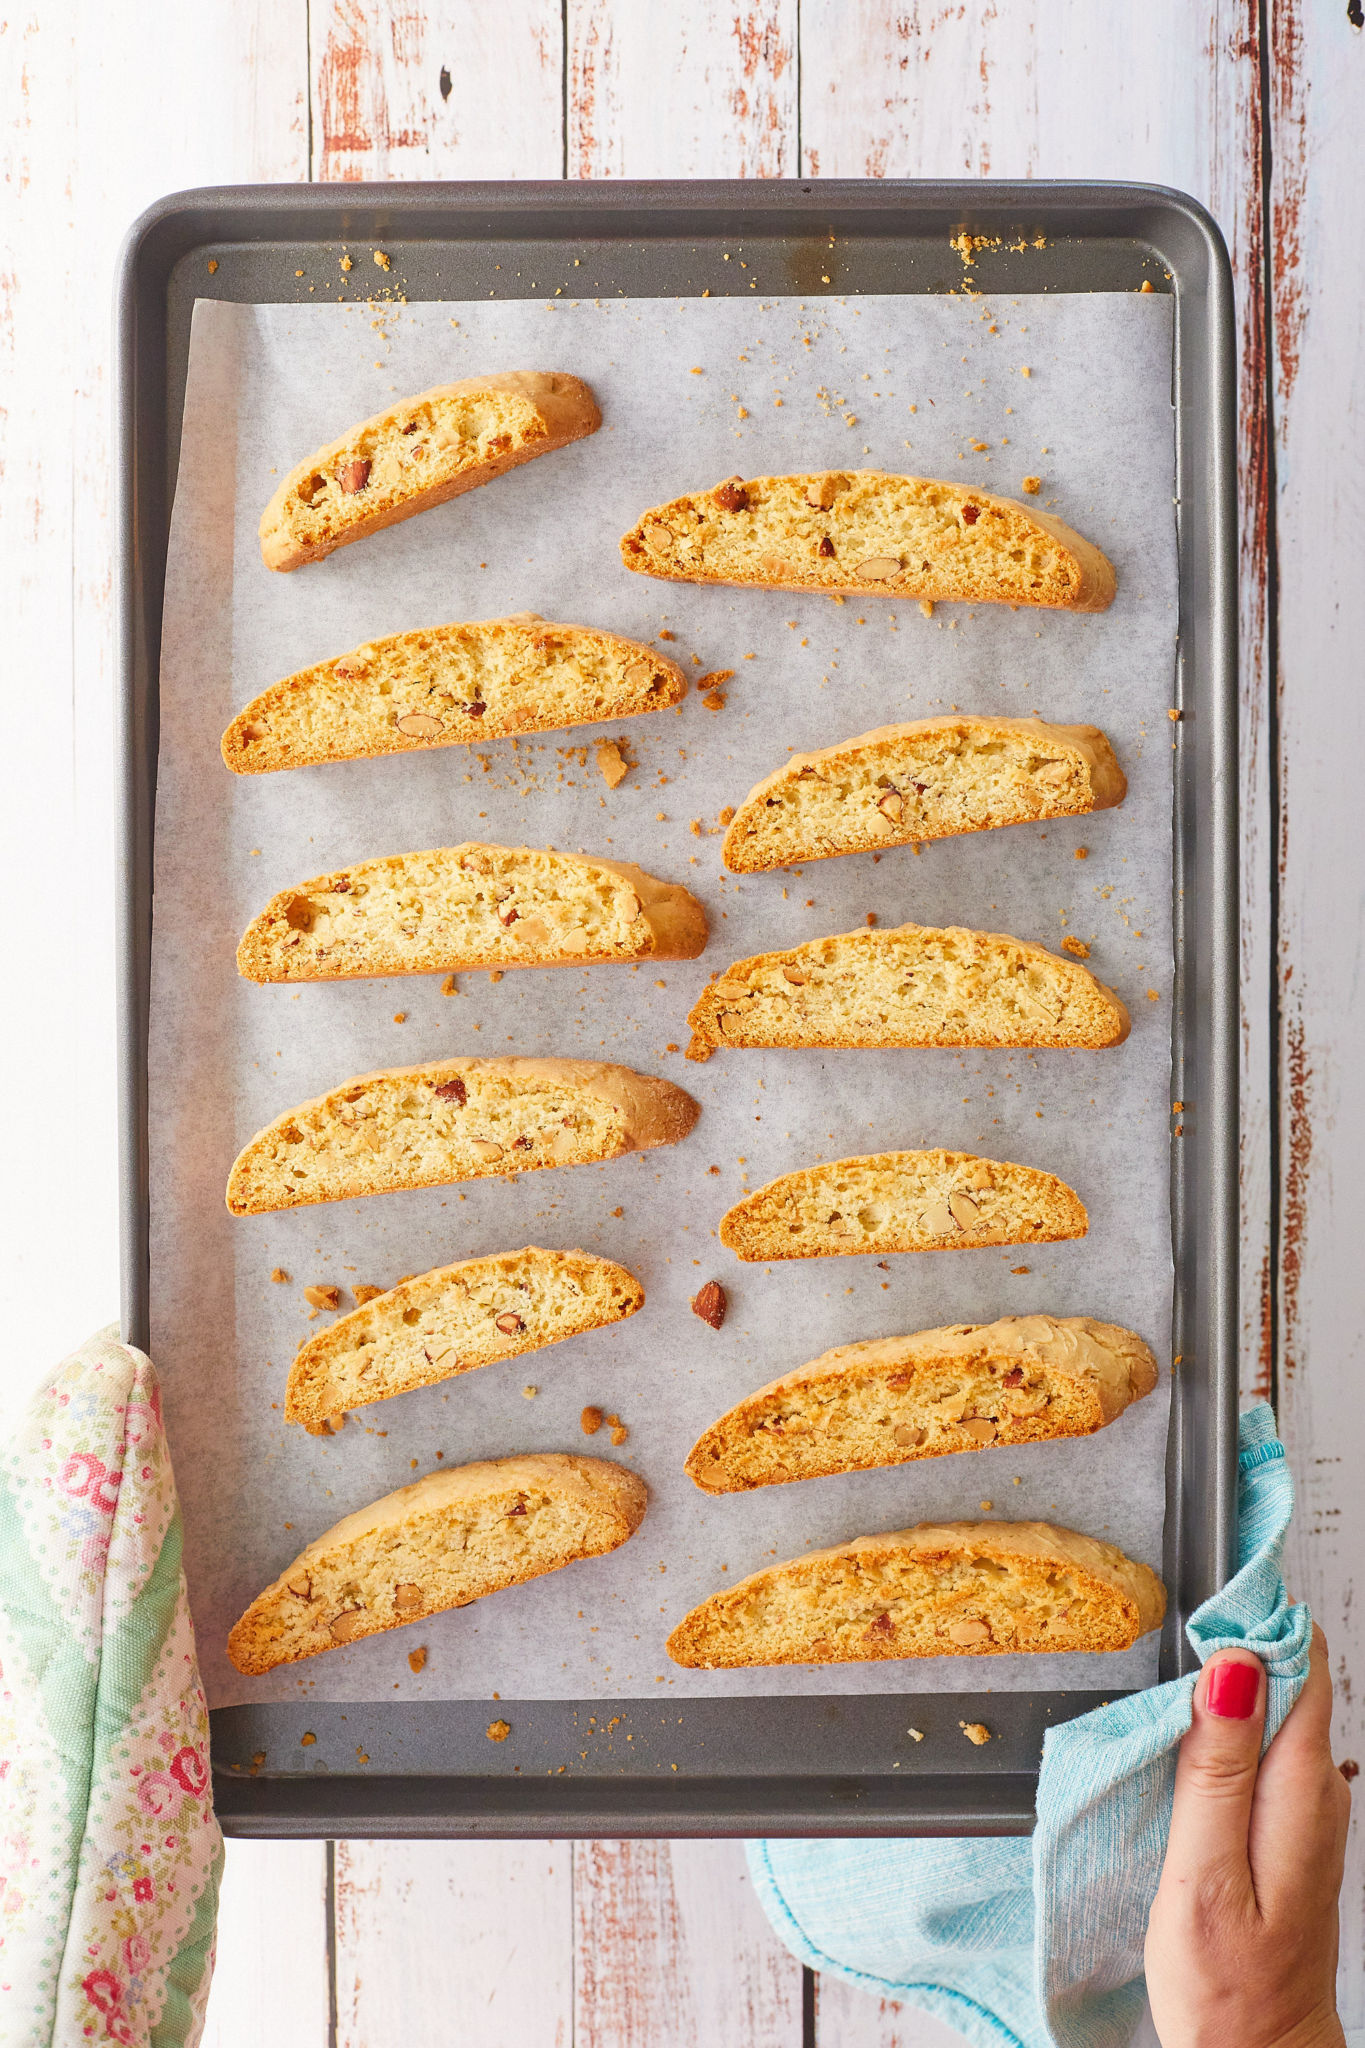 A tray full of homemade almond biscotti.